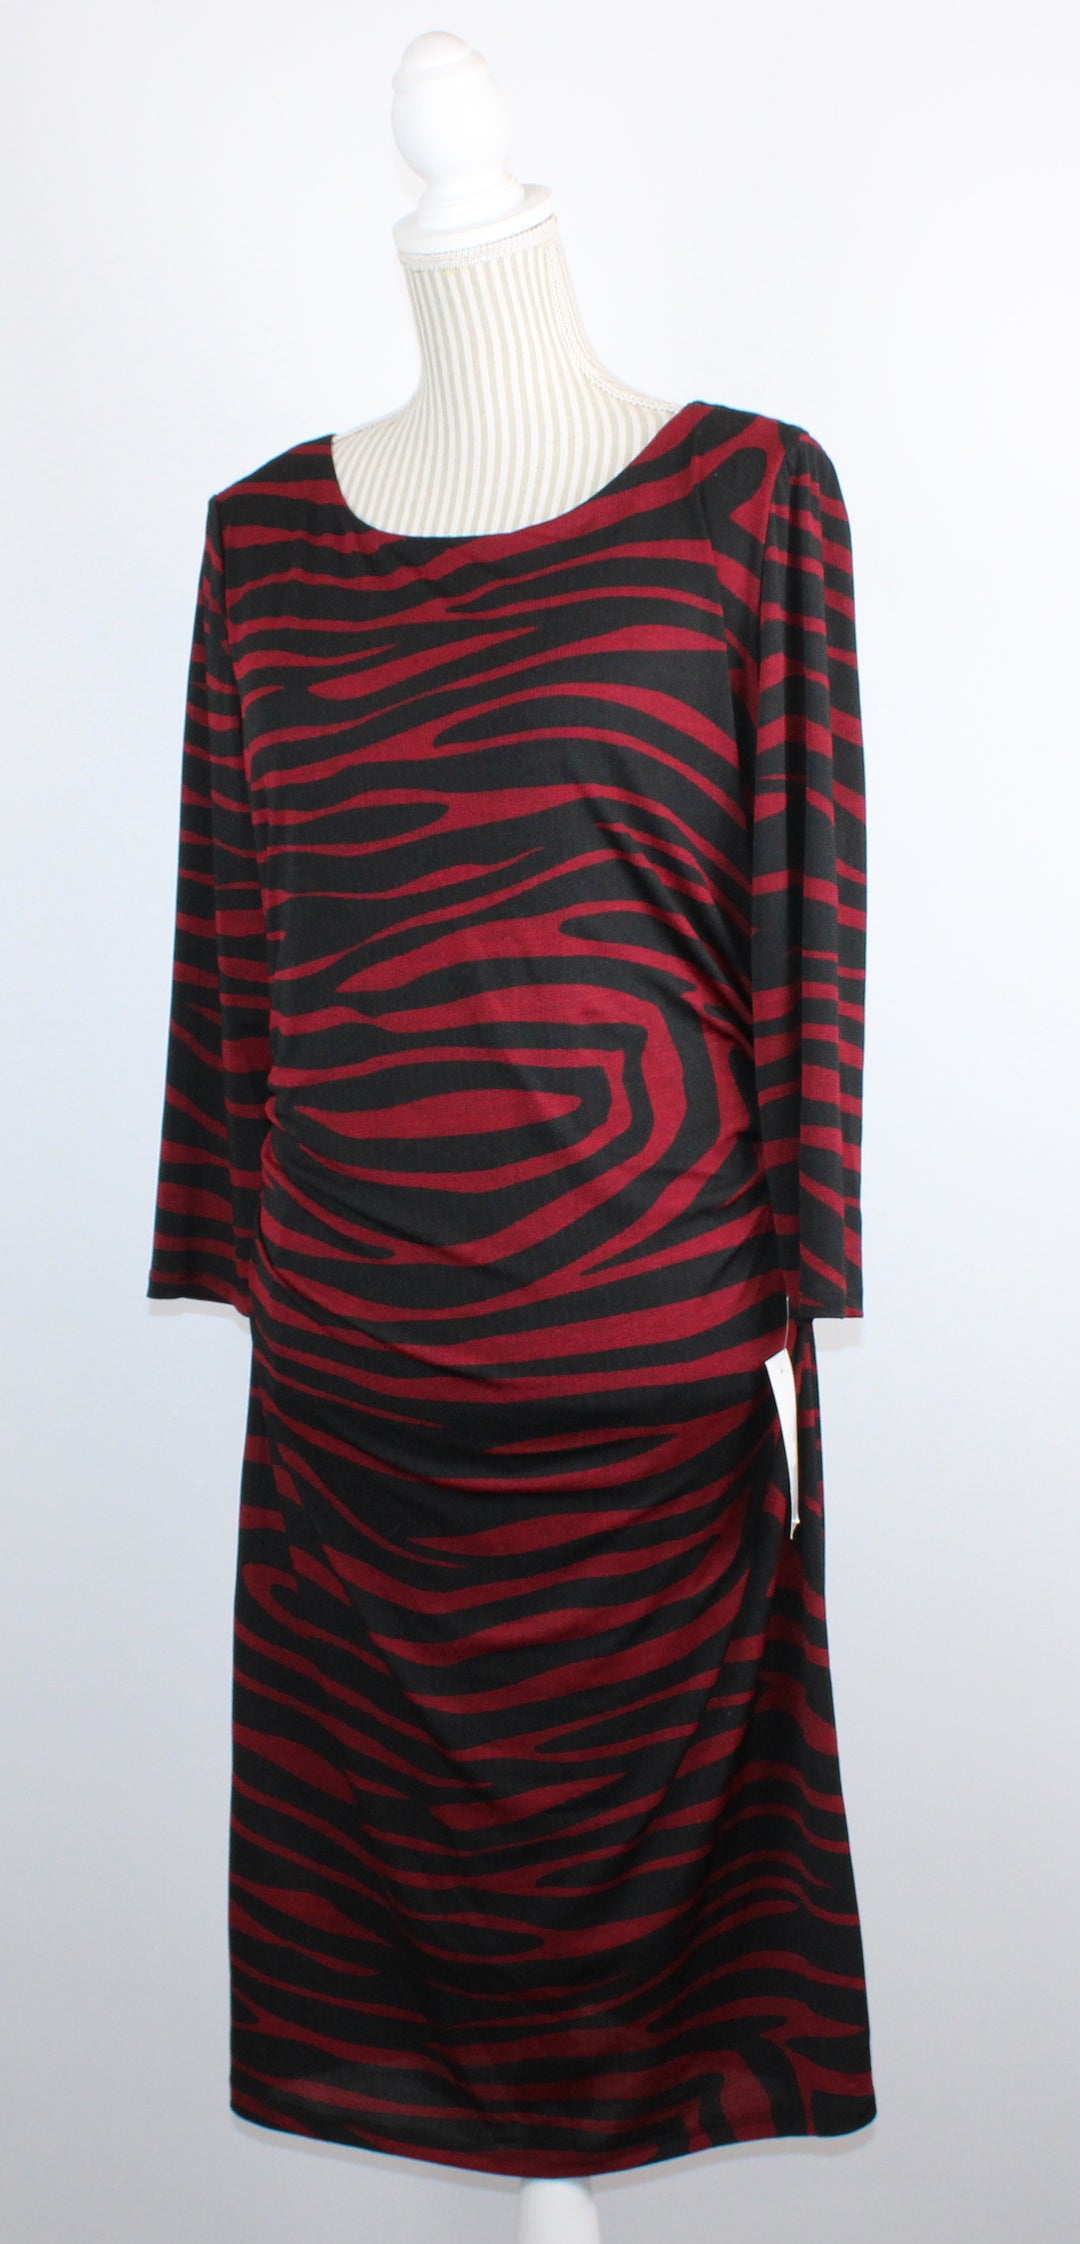 EVIKA DRESS LARGE NEW! MADE IN CANADA!